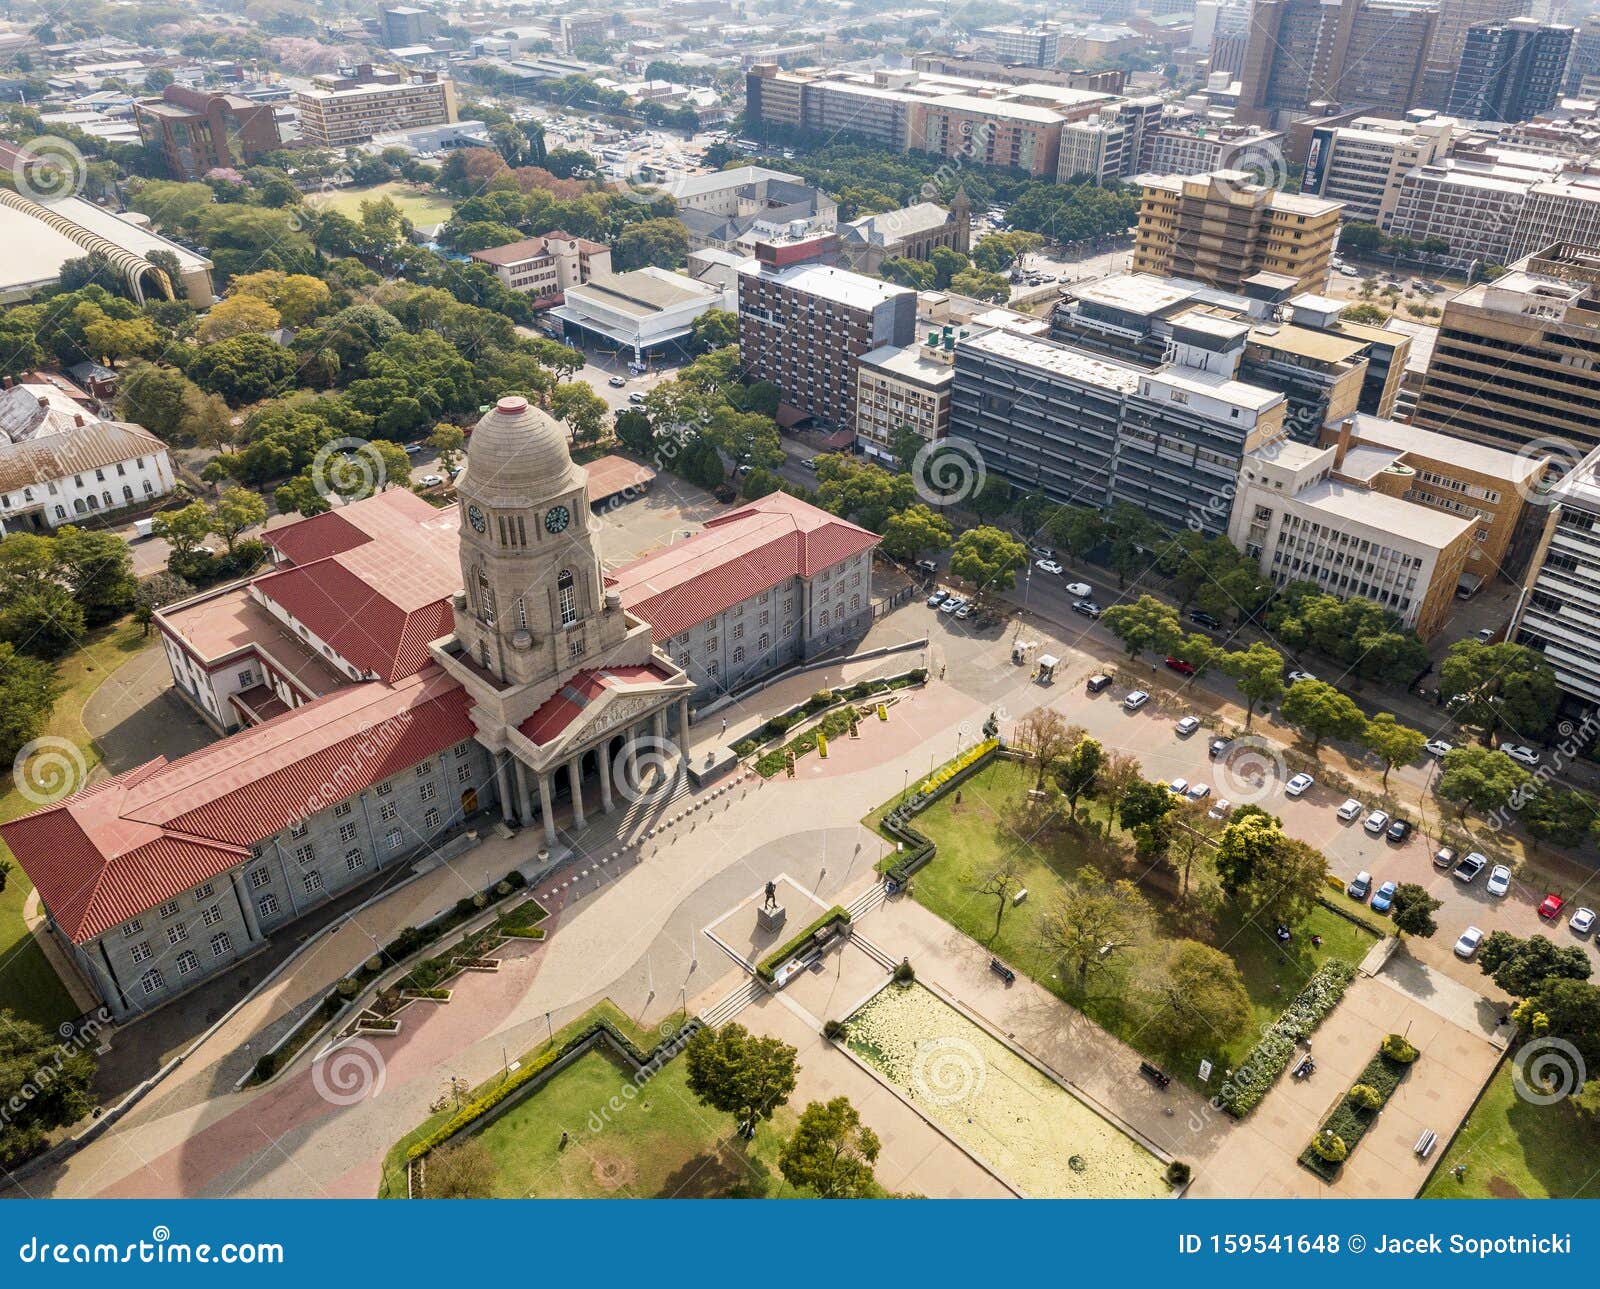 aerial view of tshwane city hall in the heart of pretoria, south africa